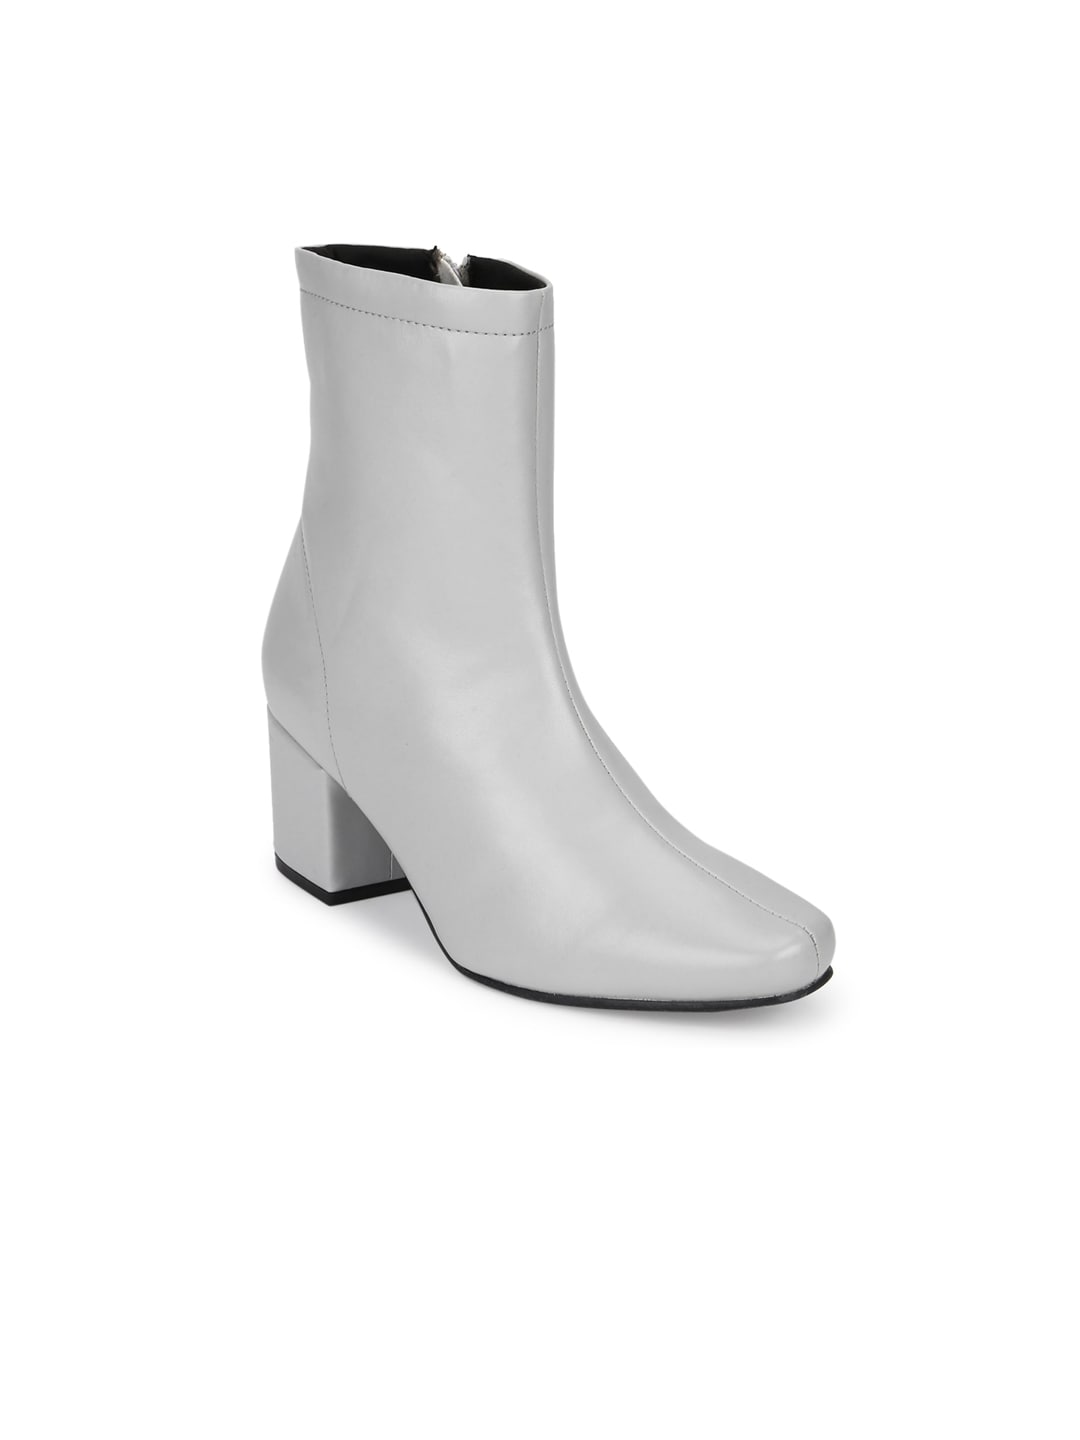 Truffle Collection Grey High-Top Block Heeled Boots Price in India